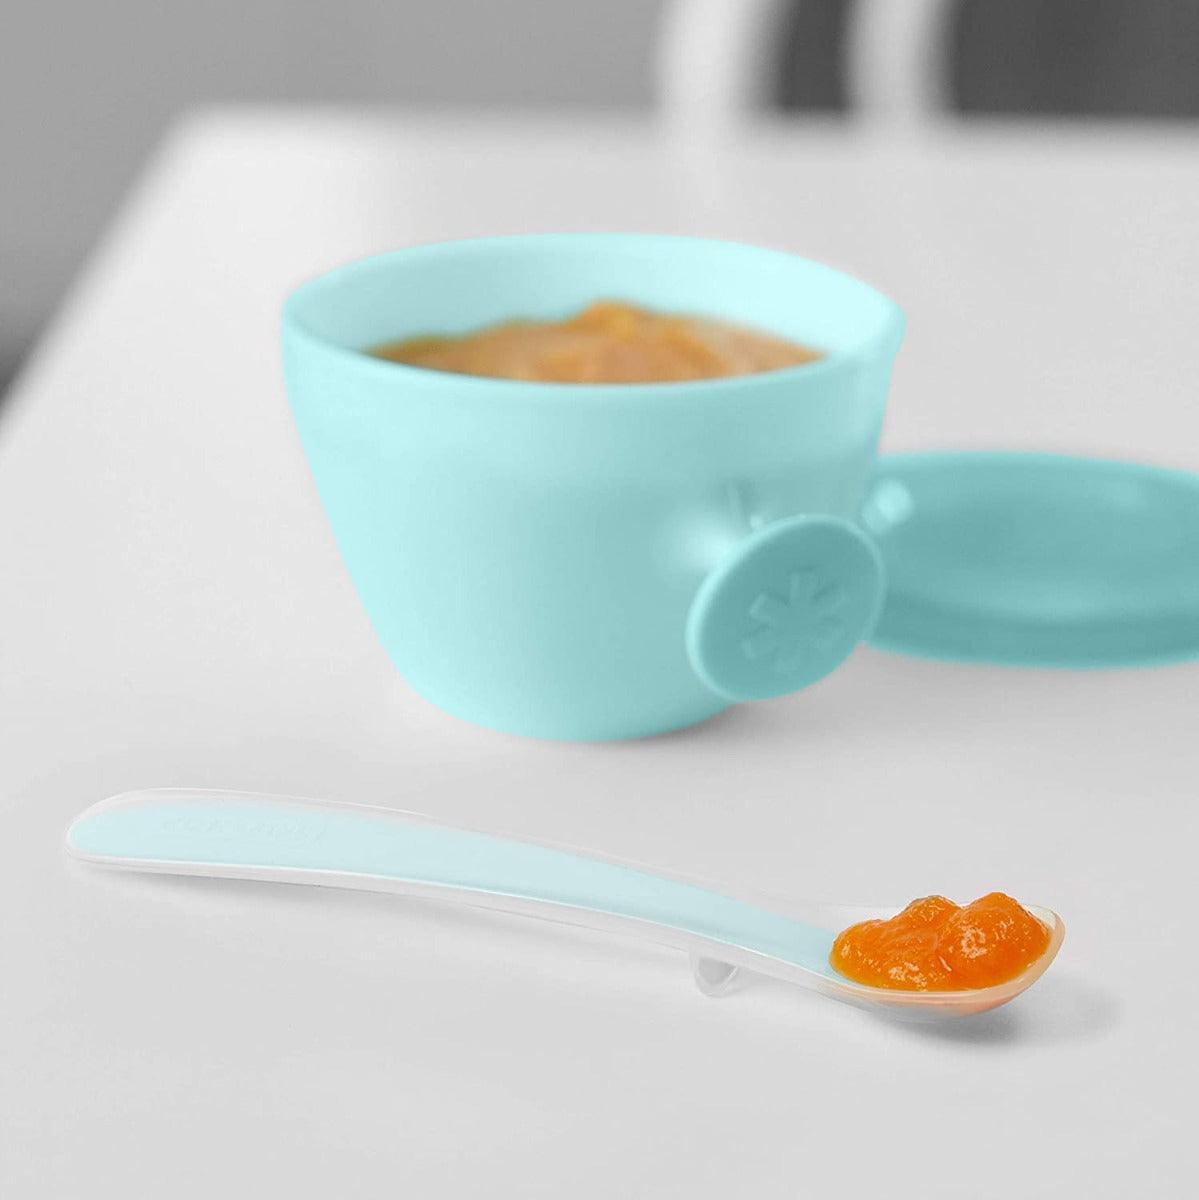 Skip Hop Easy-Feed Spoons Teal-Grey - Weaning Accessory For Ages 0-3 Years